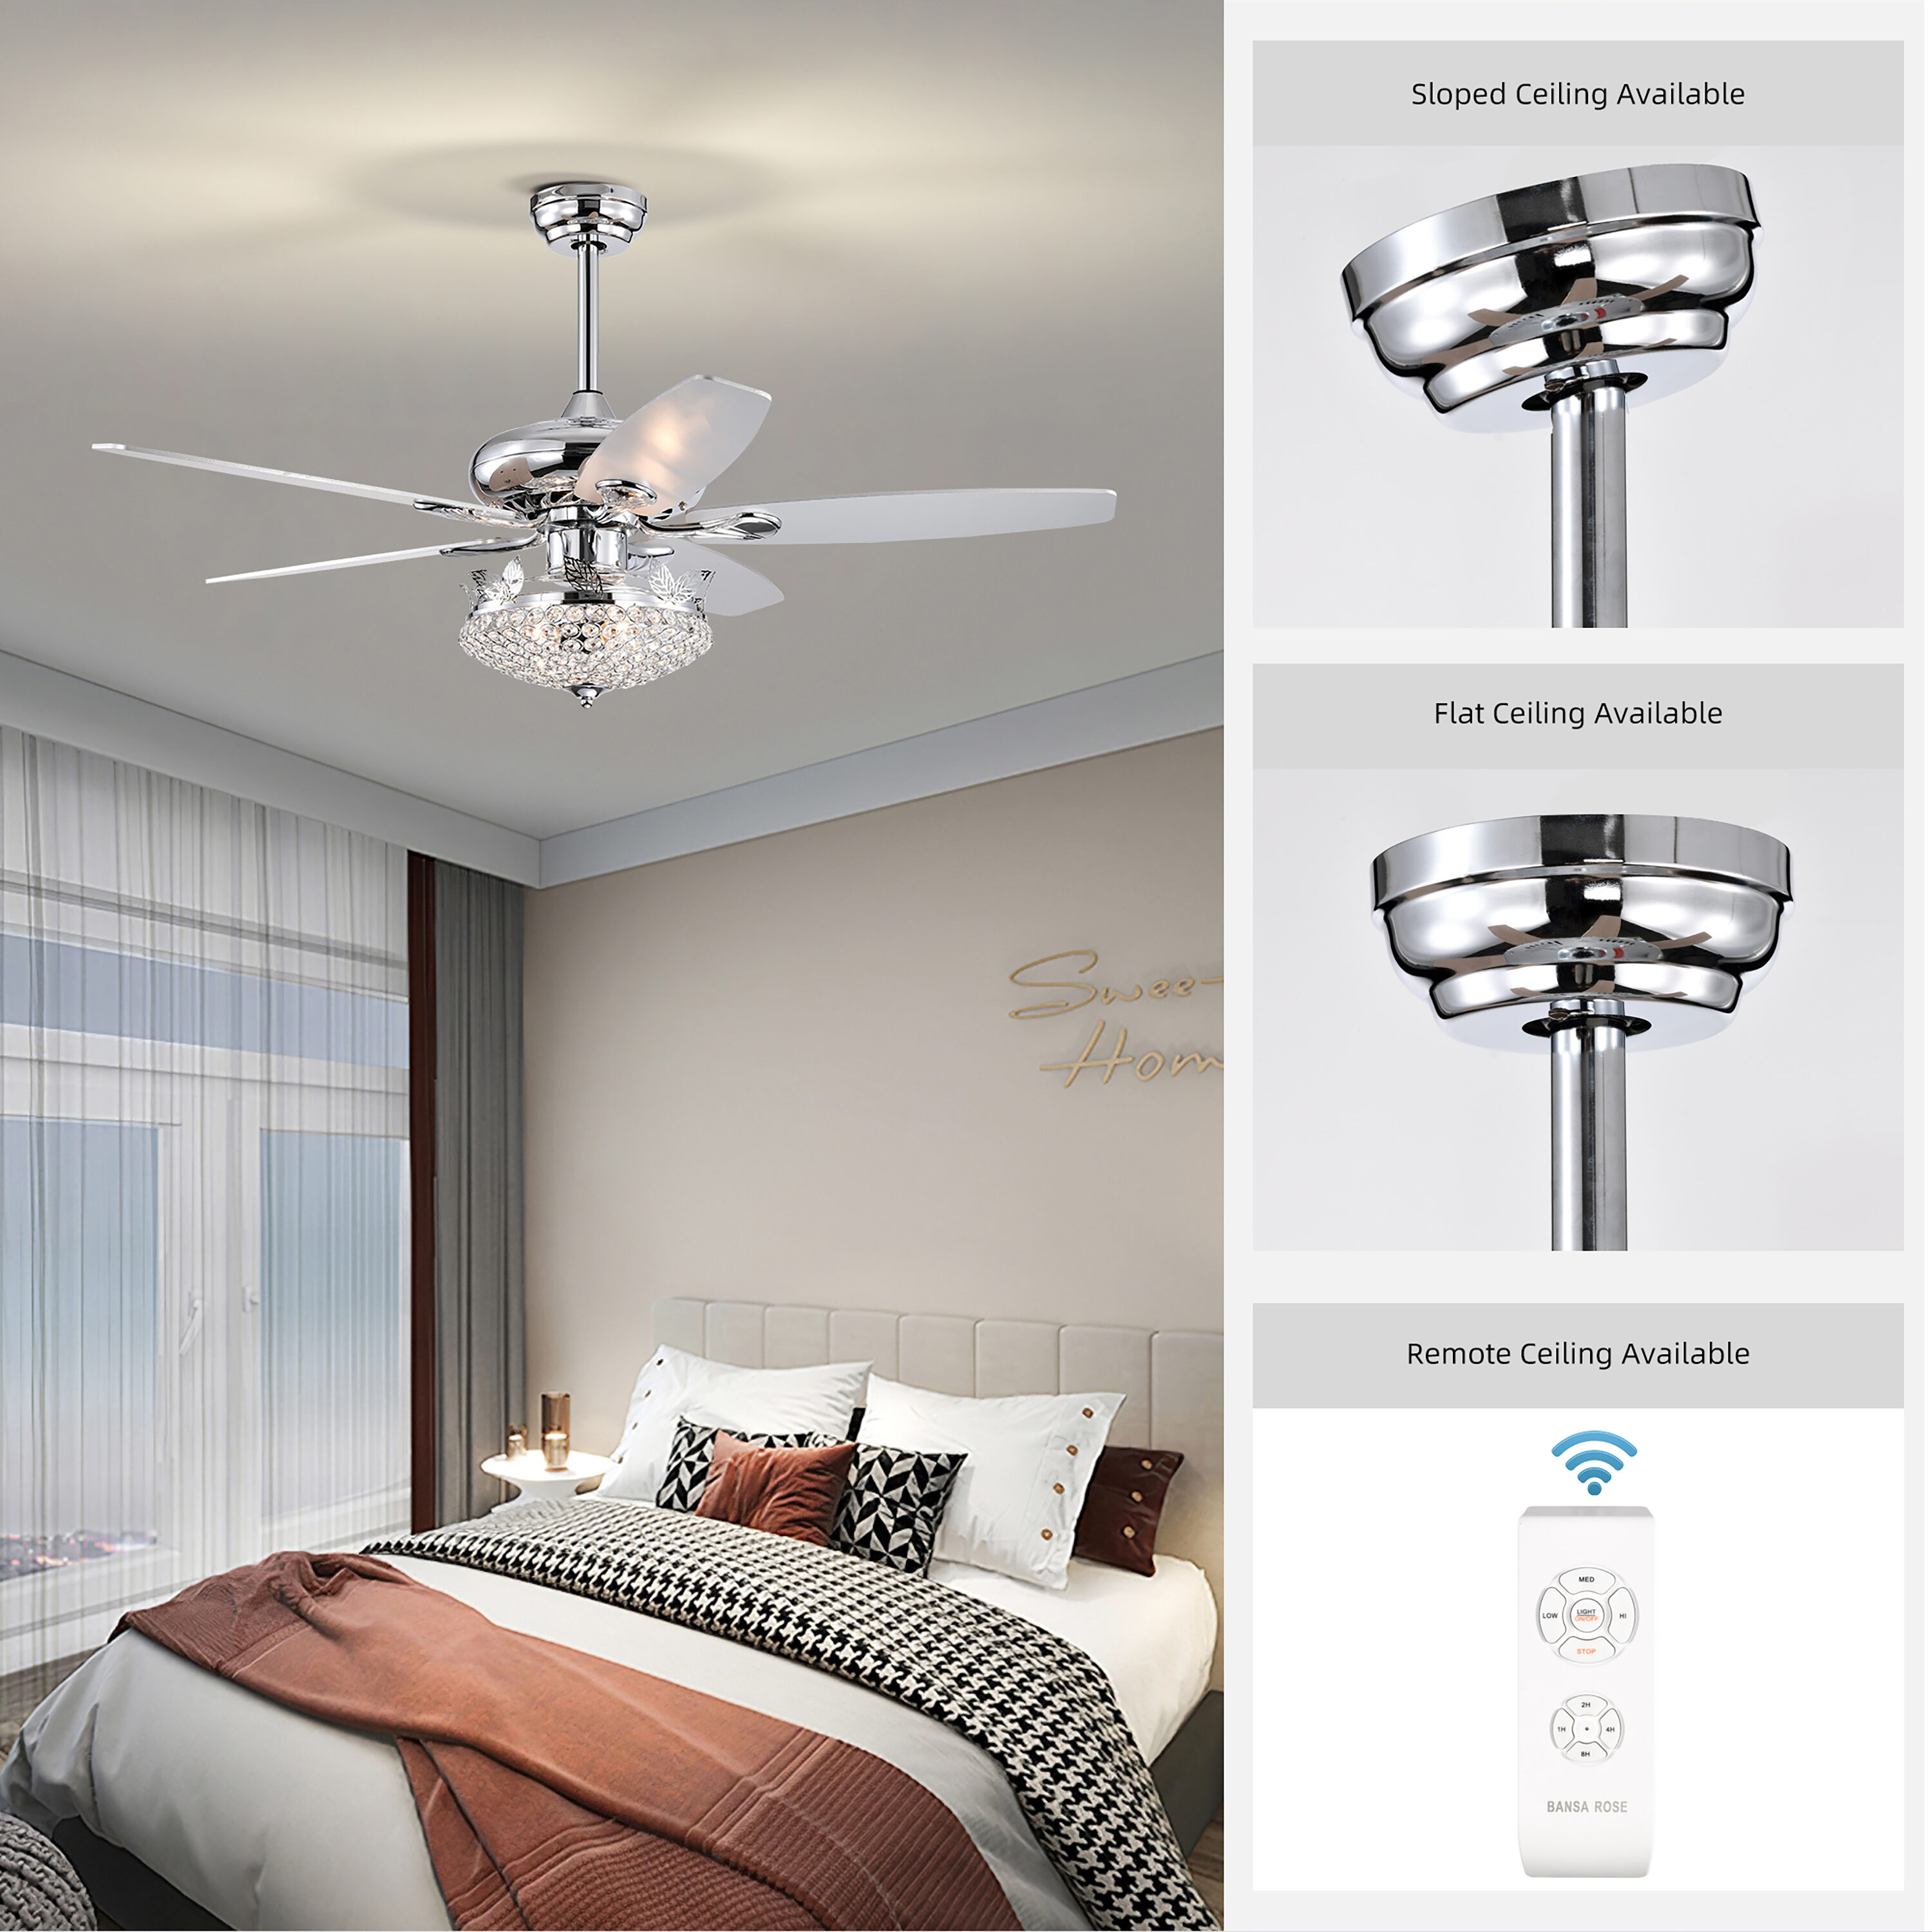 BANSA ROSE 52-in Silver Indoor/Outdoor Ceiling Fan and Remote (5 